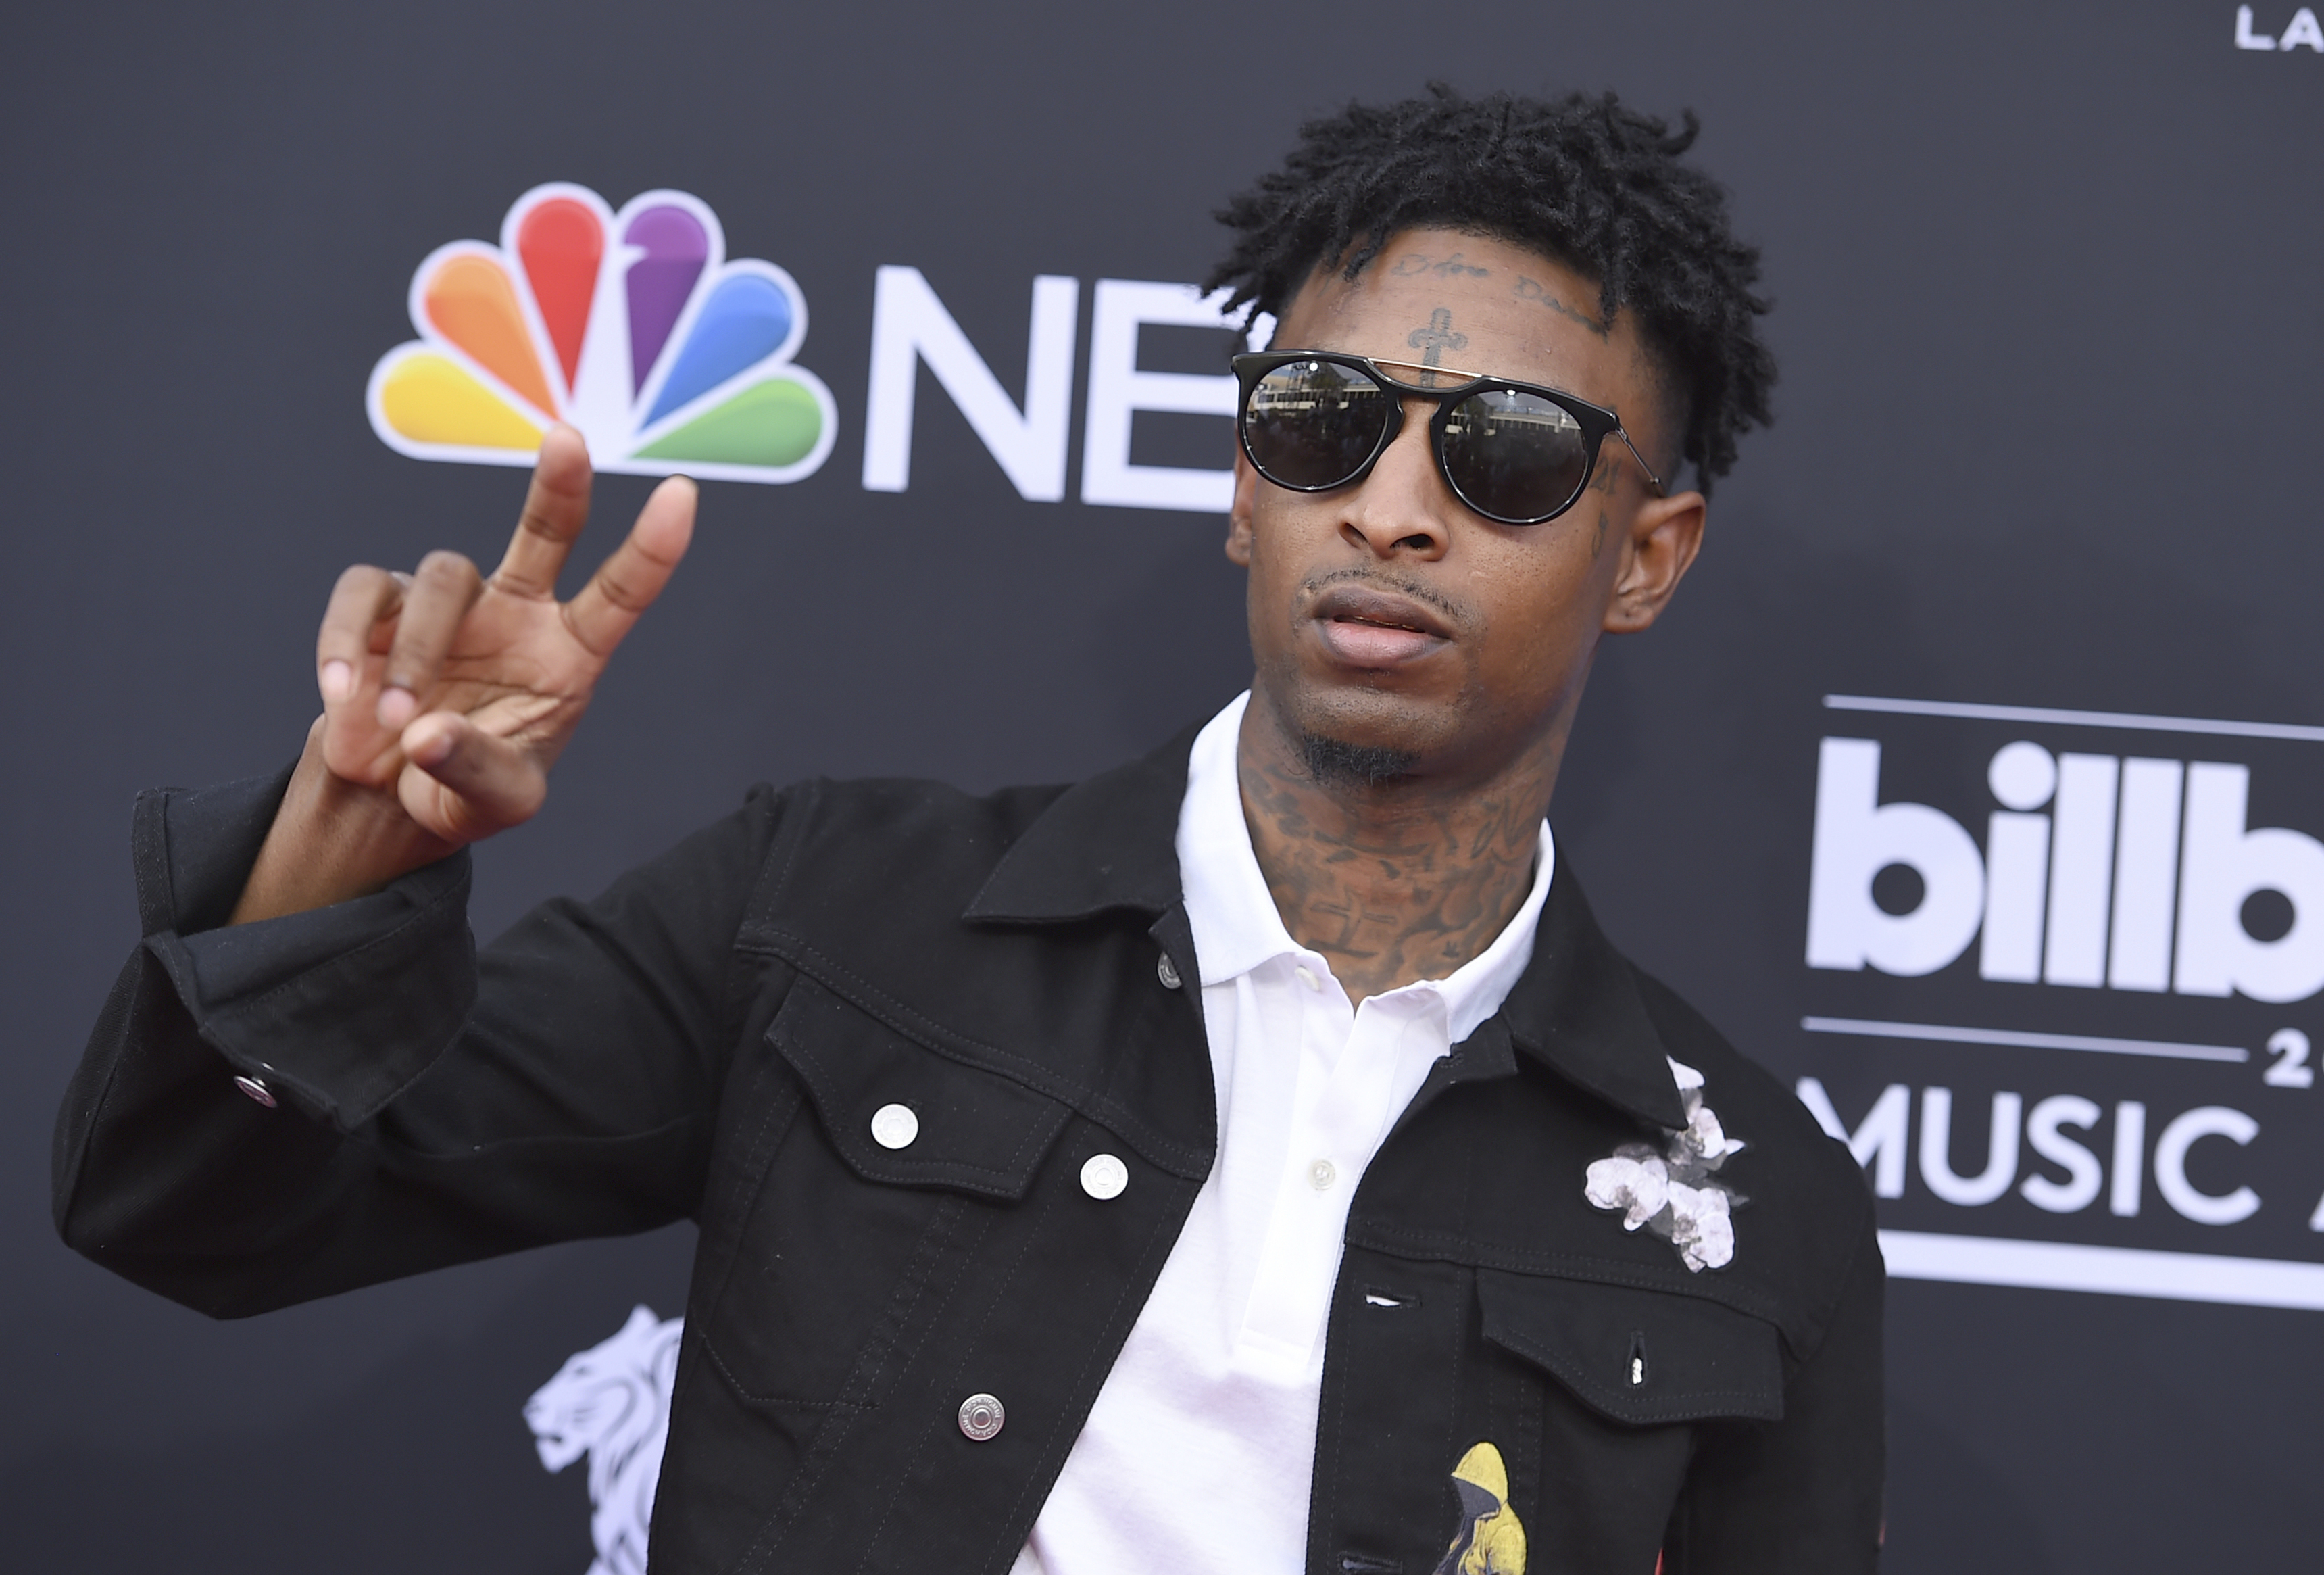 21 Savage & Metro Boomin Take To the Streets of ATL for Runnin Video